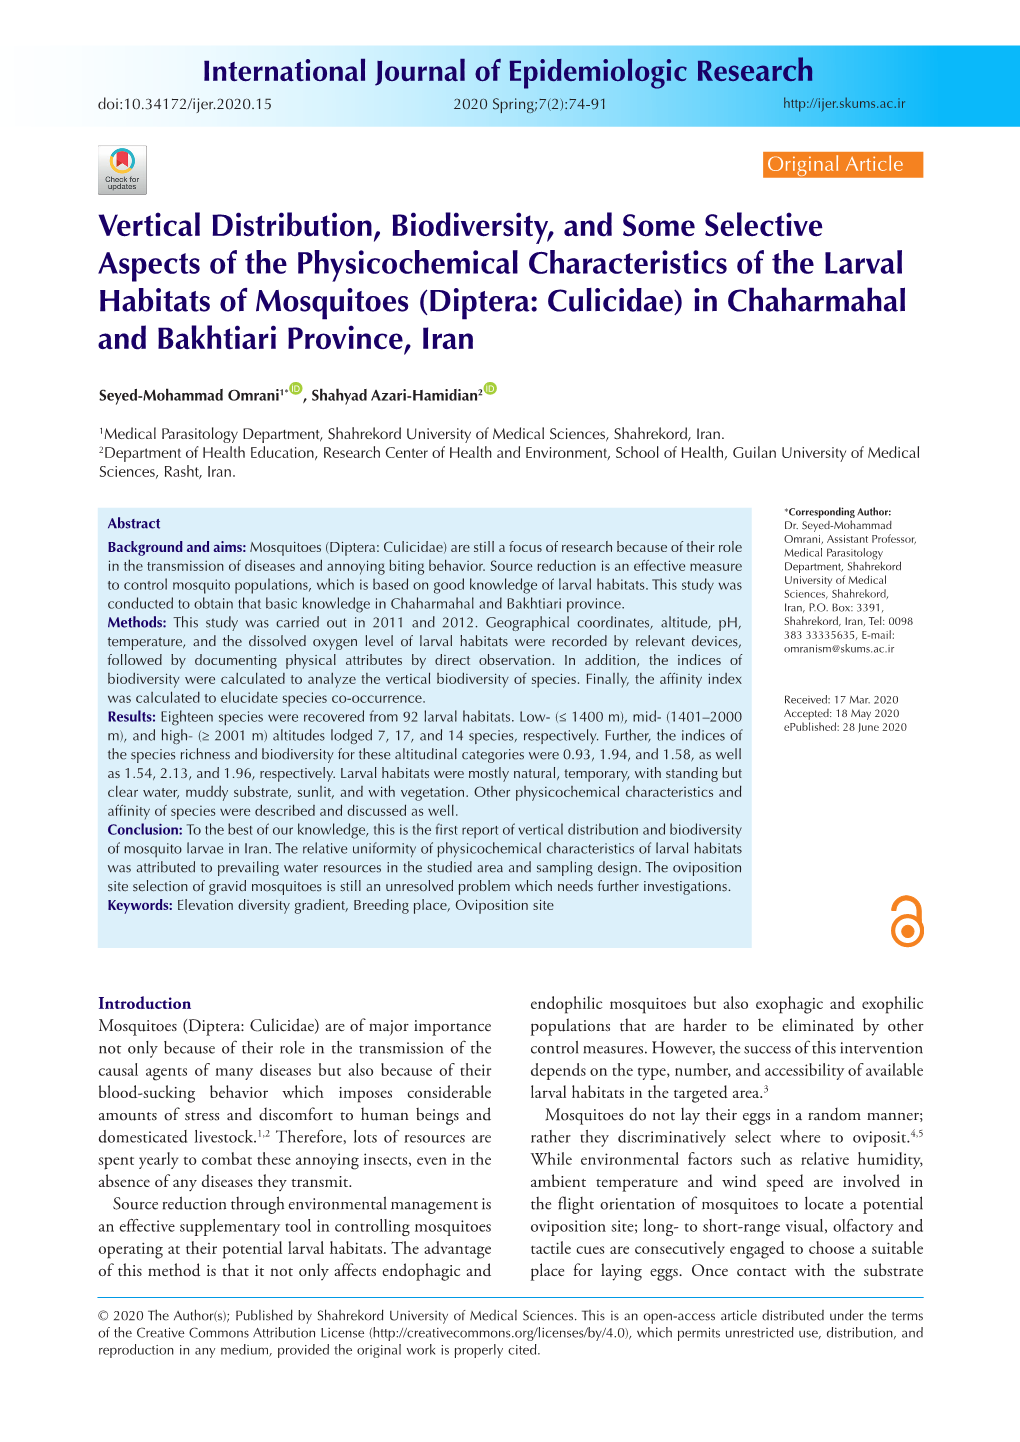 Vertical Distribution, Biodiversity, and Some Selective Aspects of the Physicochemical Characteristics of the Larval Habitats Of